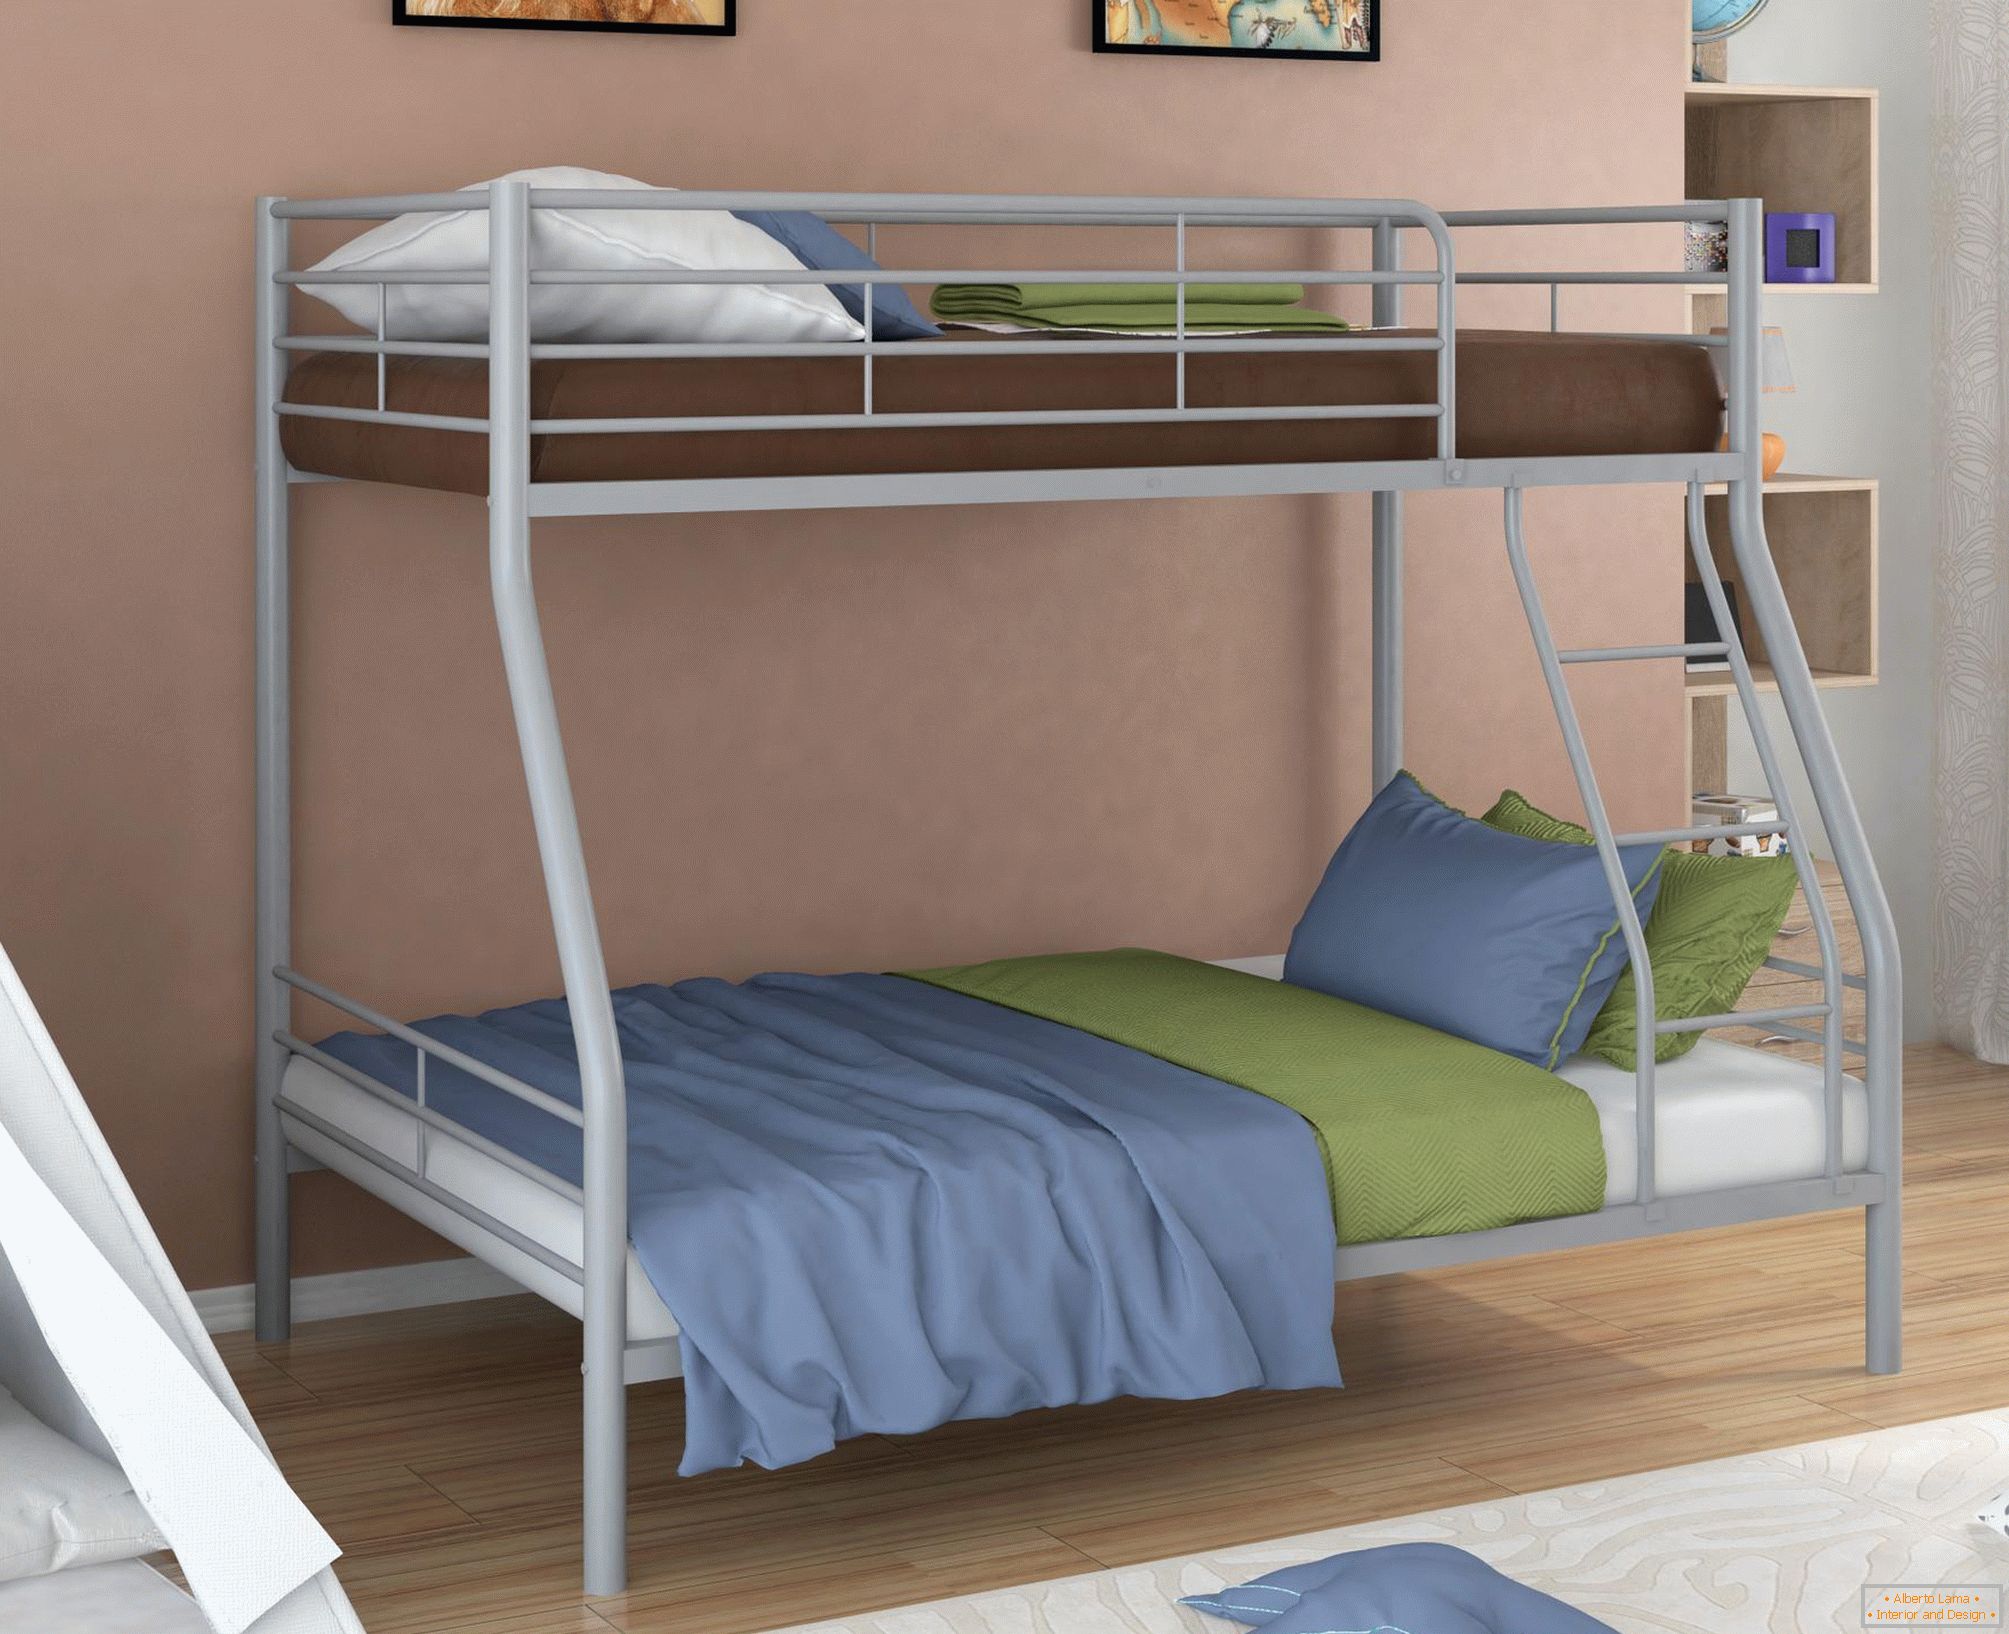 Bunk bed in high-tech style